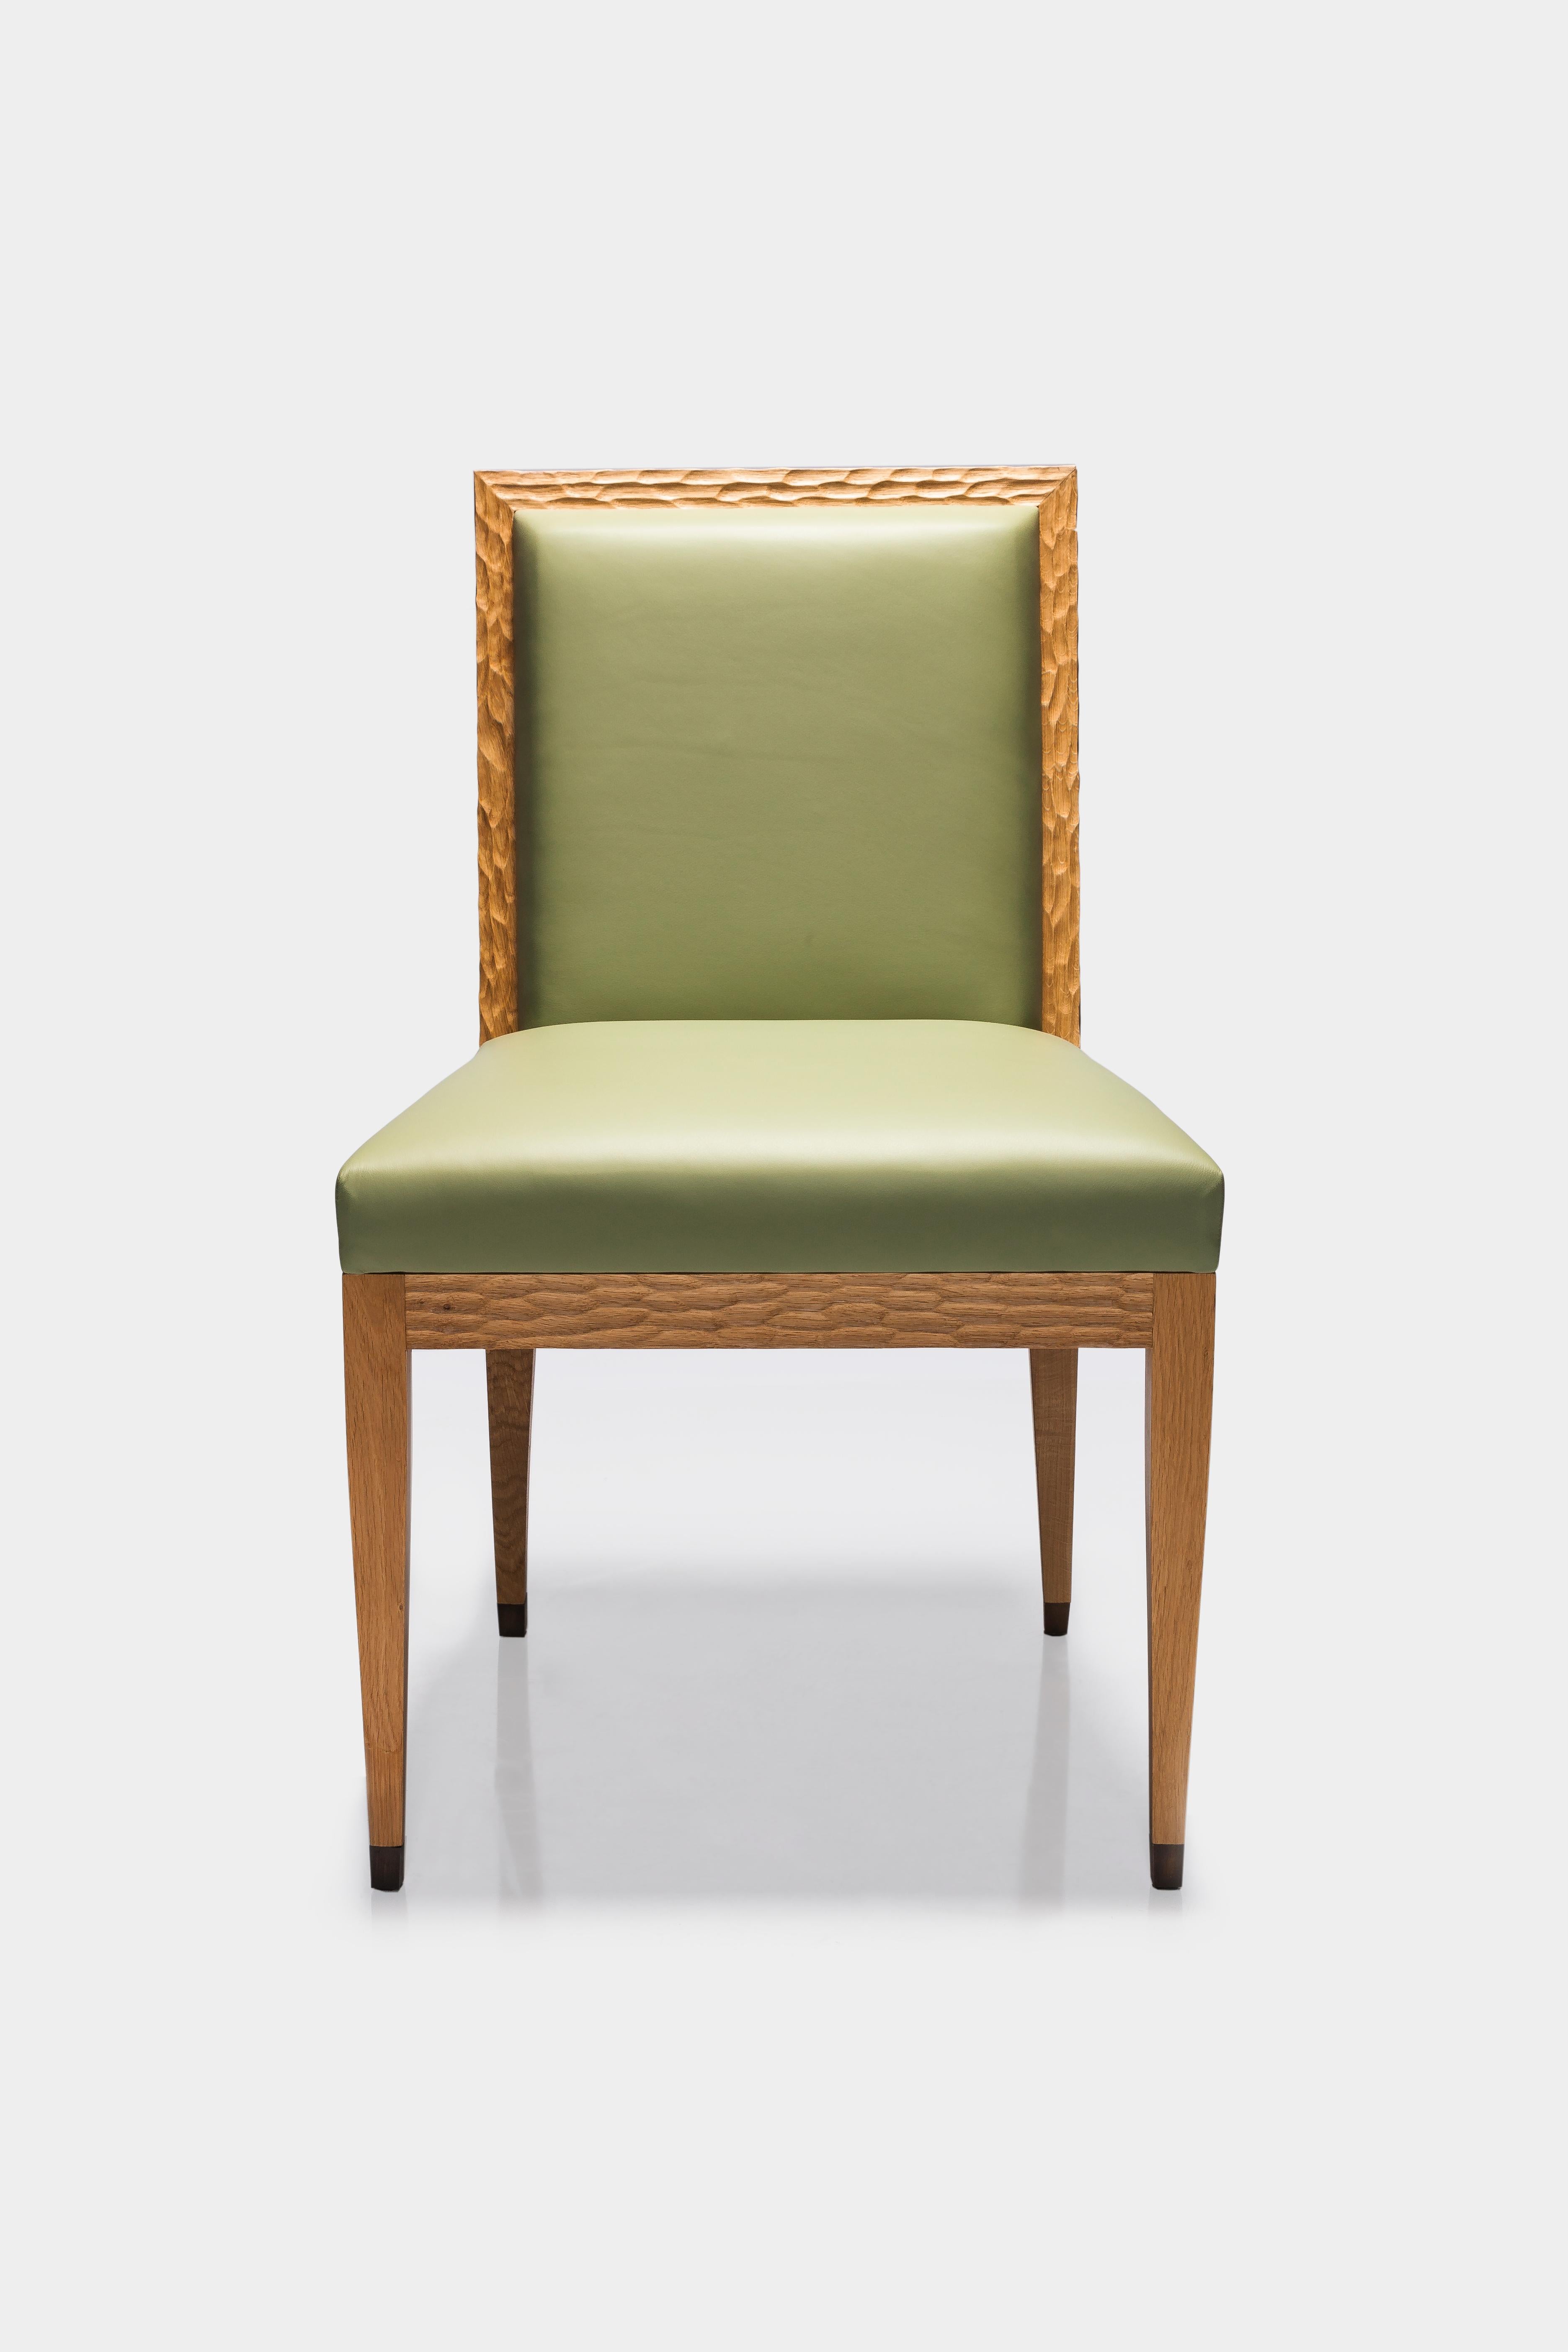 Miti chair by Francis Sultana (all prices exclude delivery).